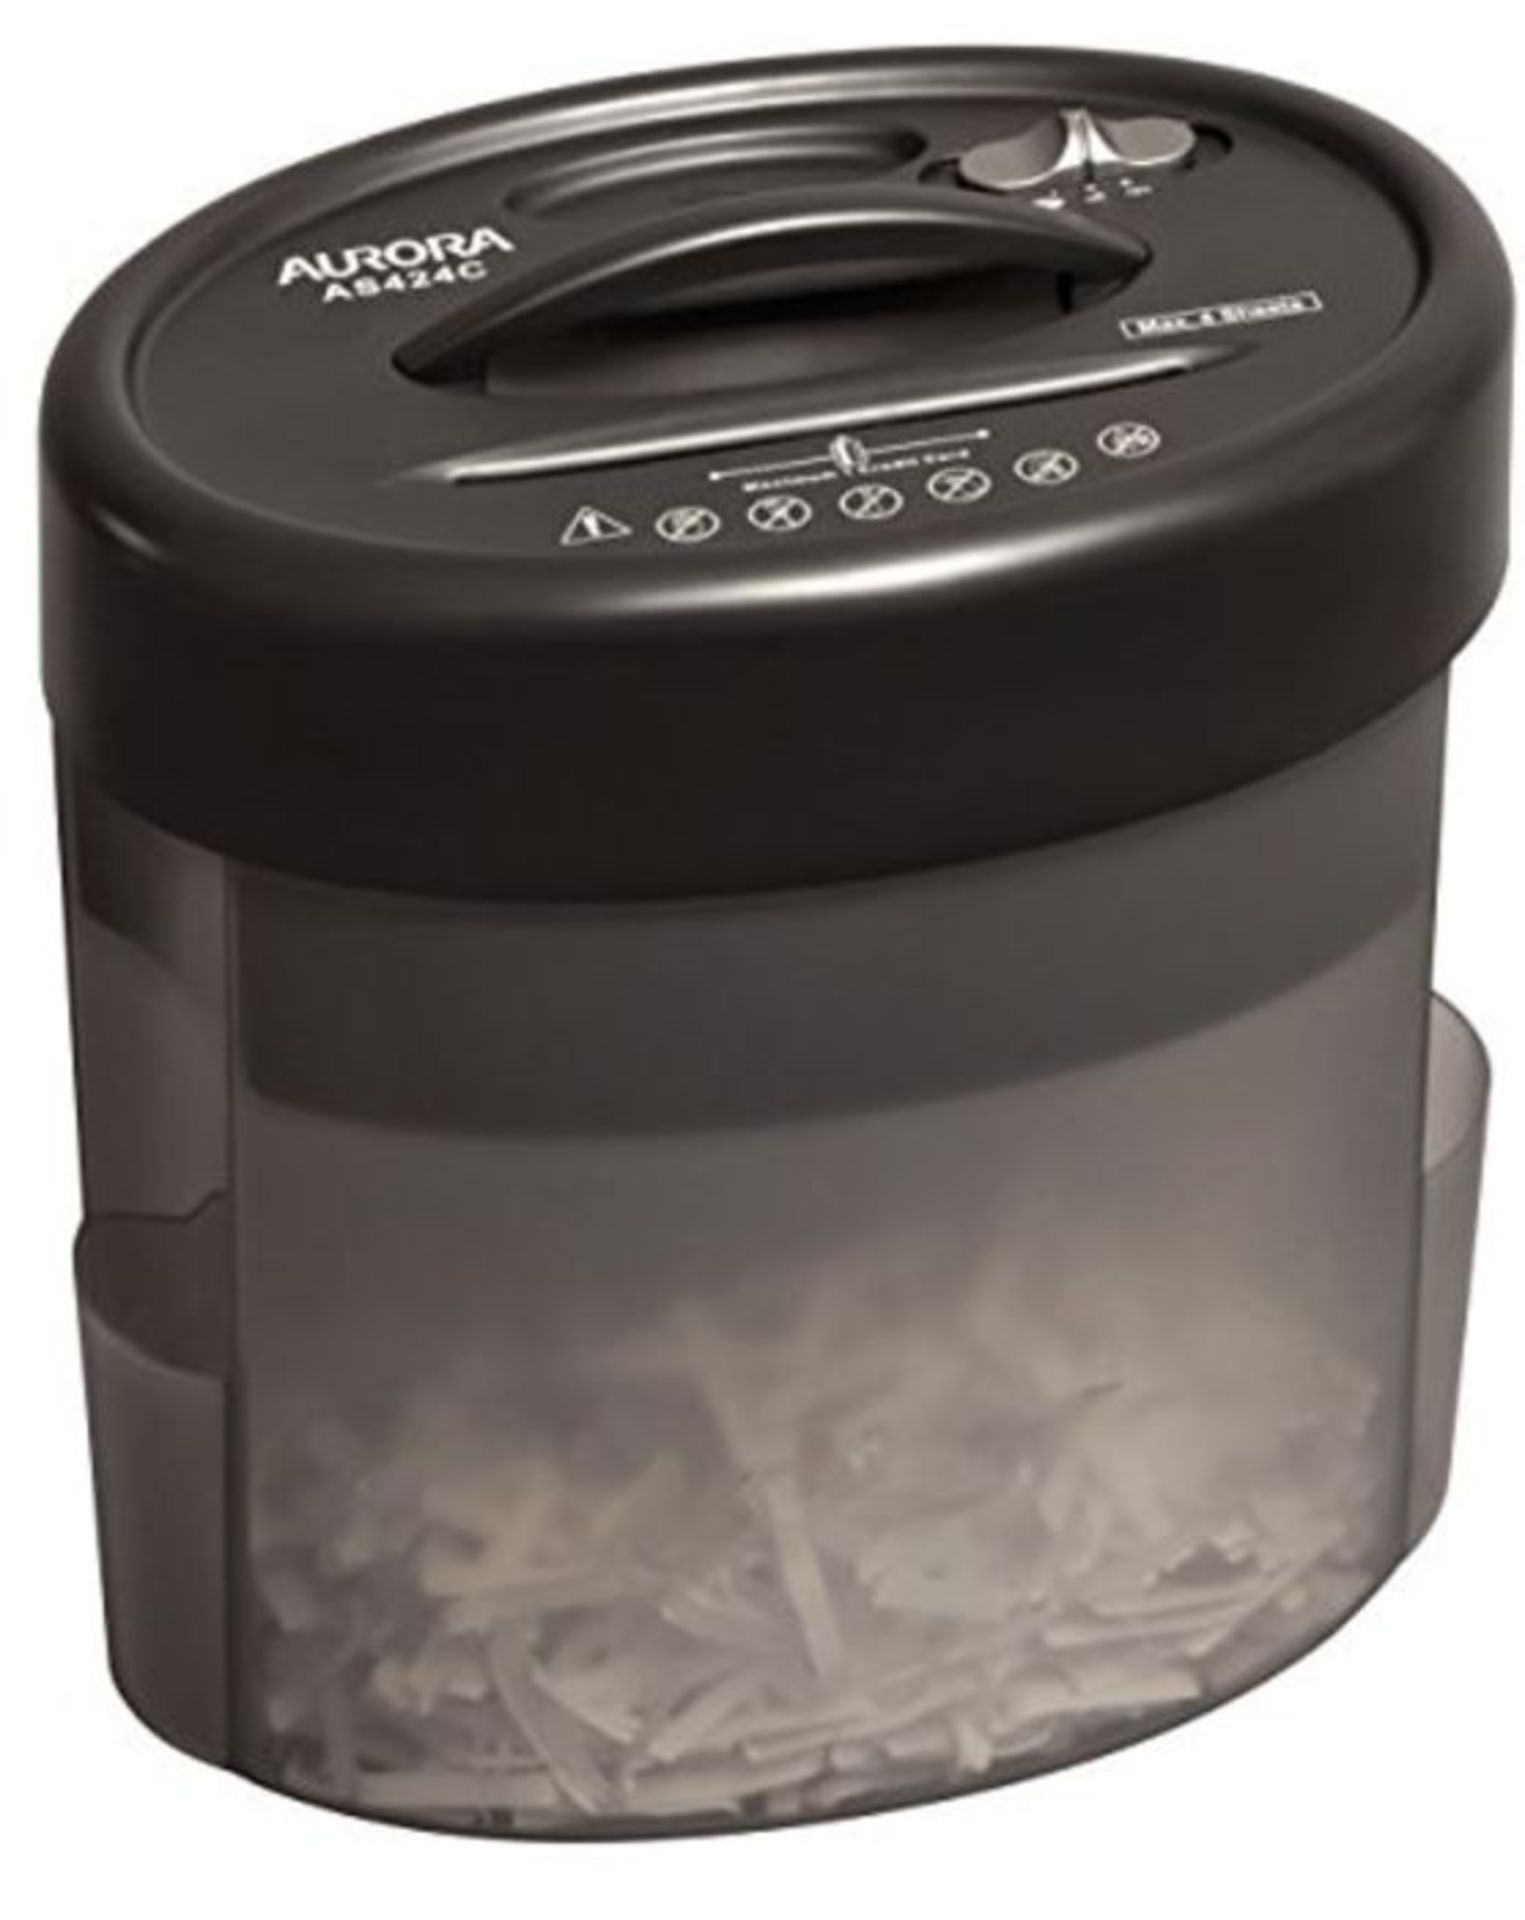 AURORA AS424C cross cut paper shredder, compact and portable and suitable for use on y